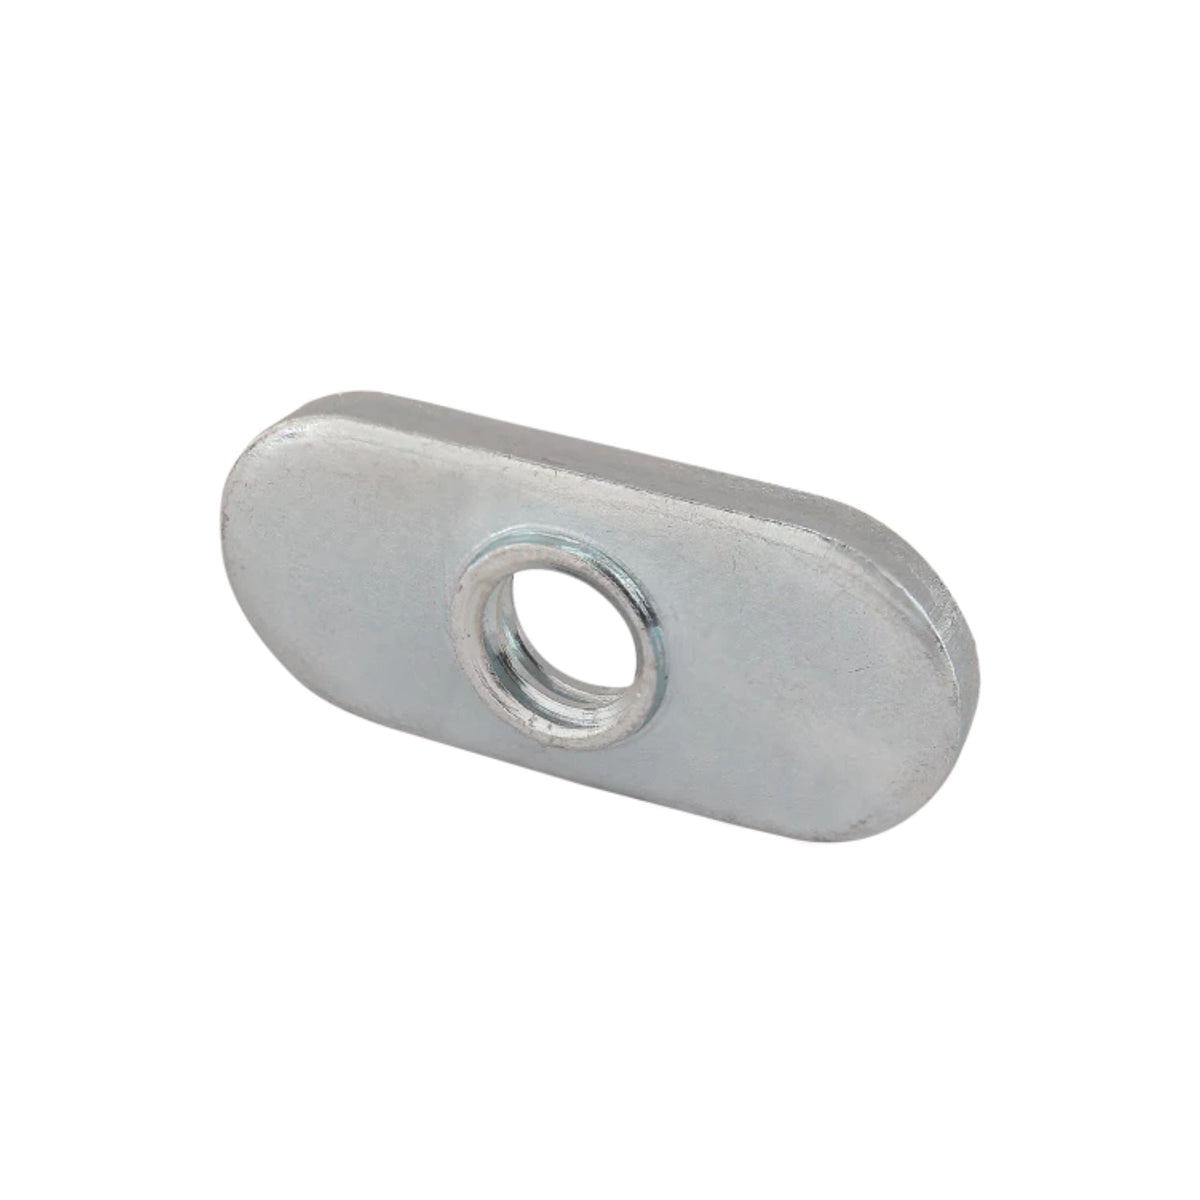 side view of a rectangular metal t-nut with rounded ends and a hole in the center